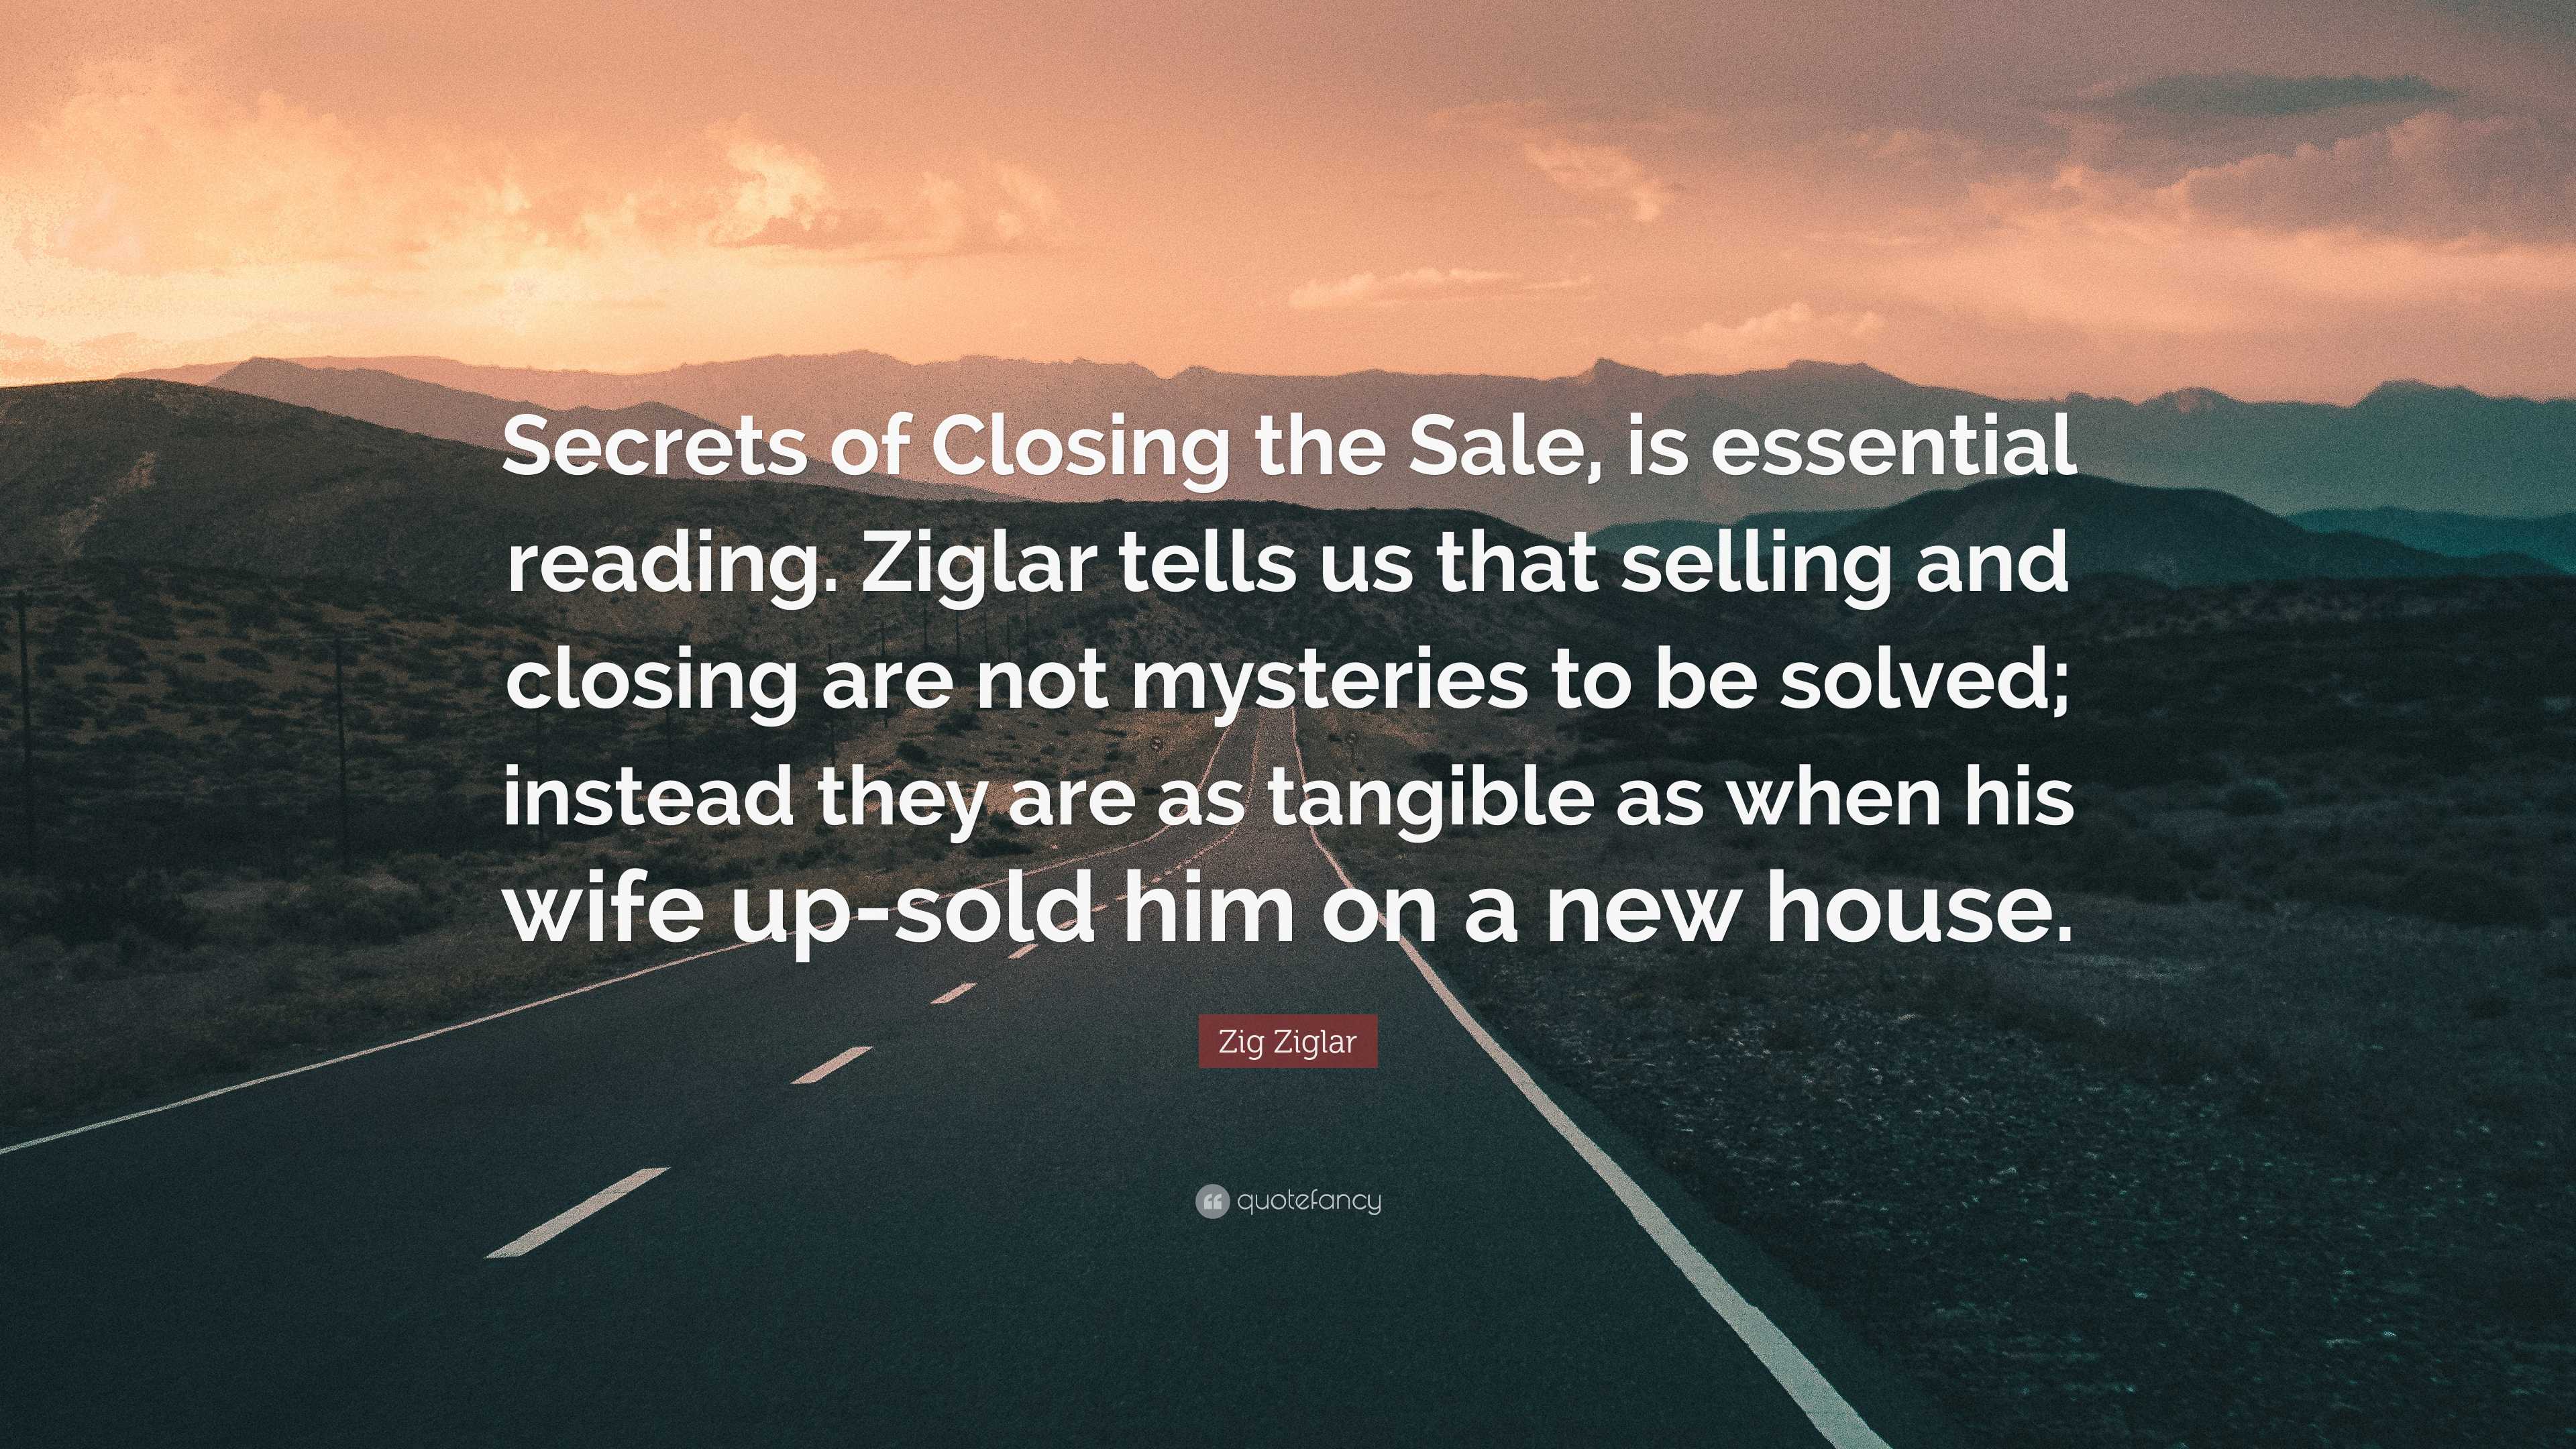 Zig Ziglar Quote: “Secrets of Closing the Sale, is essential reading.  Ziglar tells us that selling and closing are not mysteries to be solv”